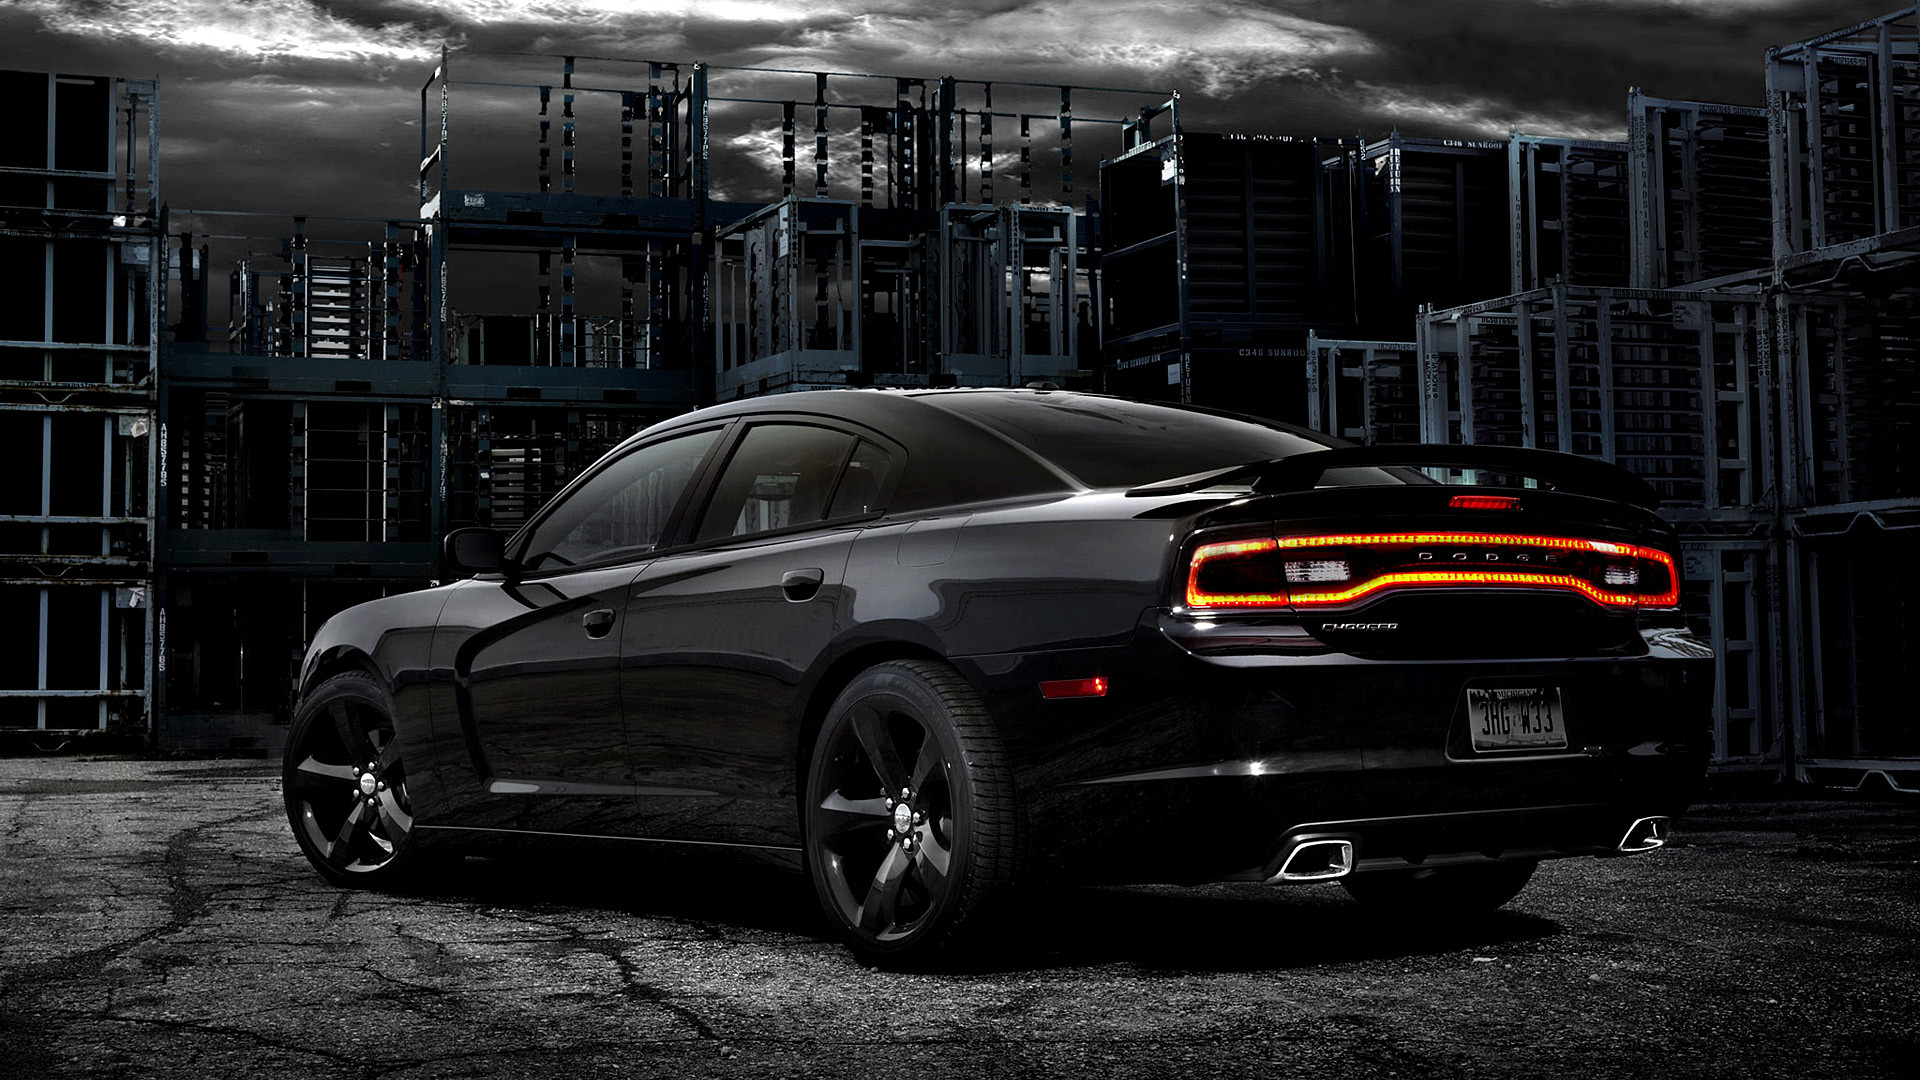 1920x1080 Dodge Charger Wallpapers